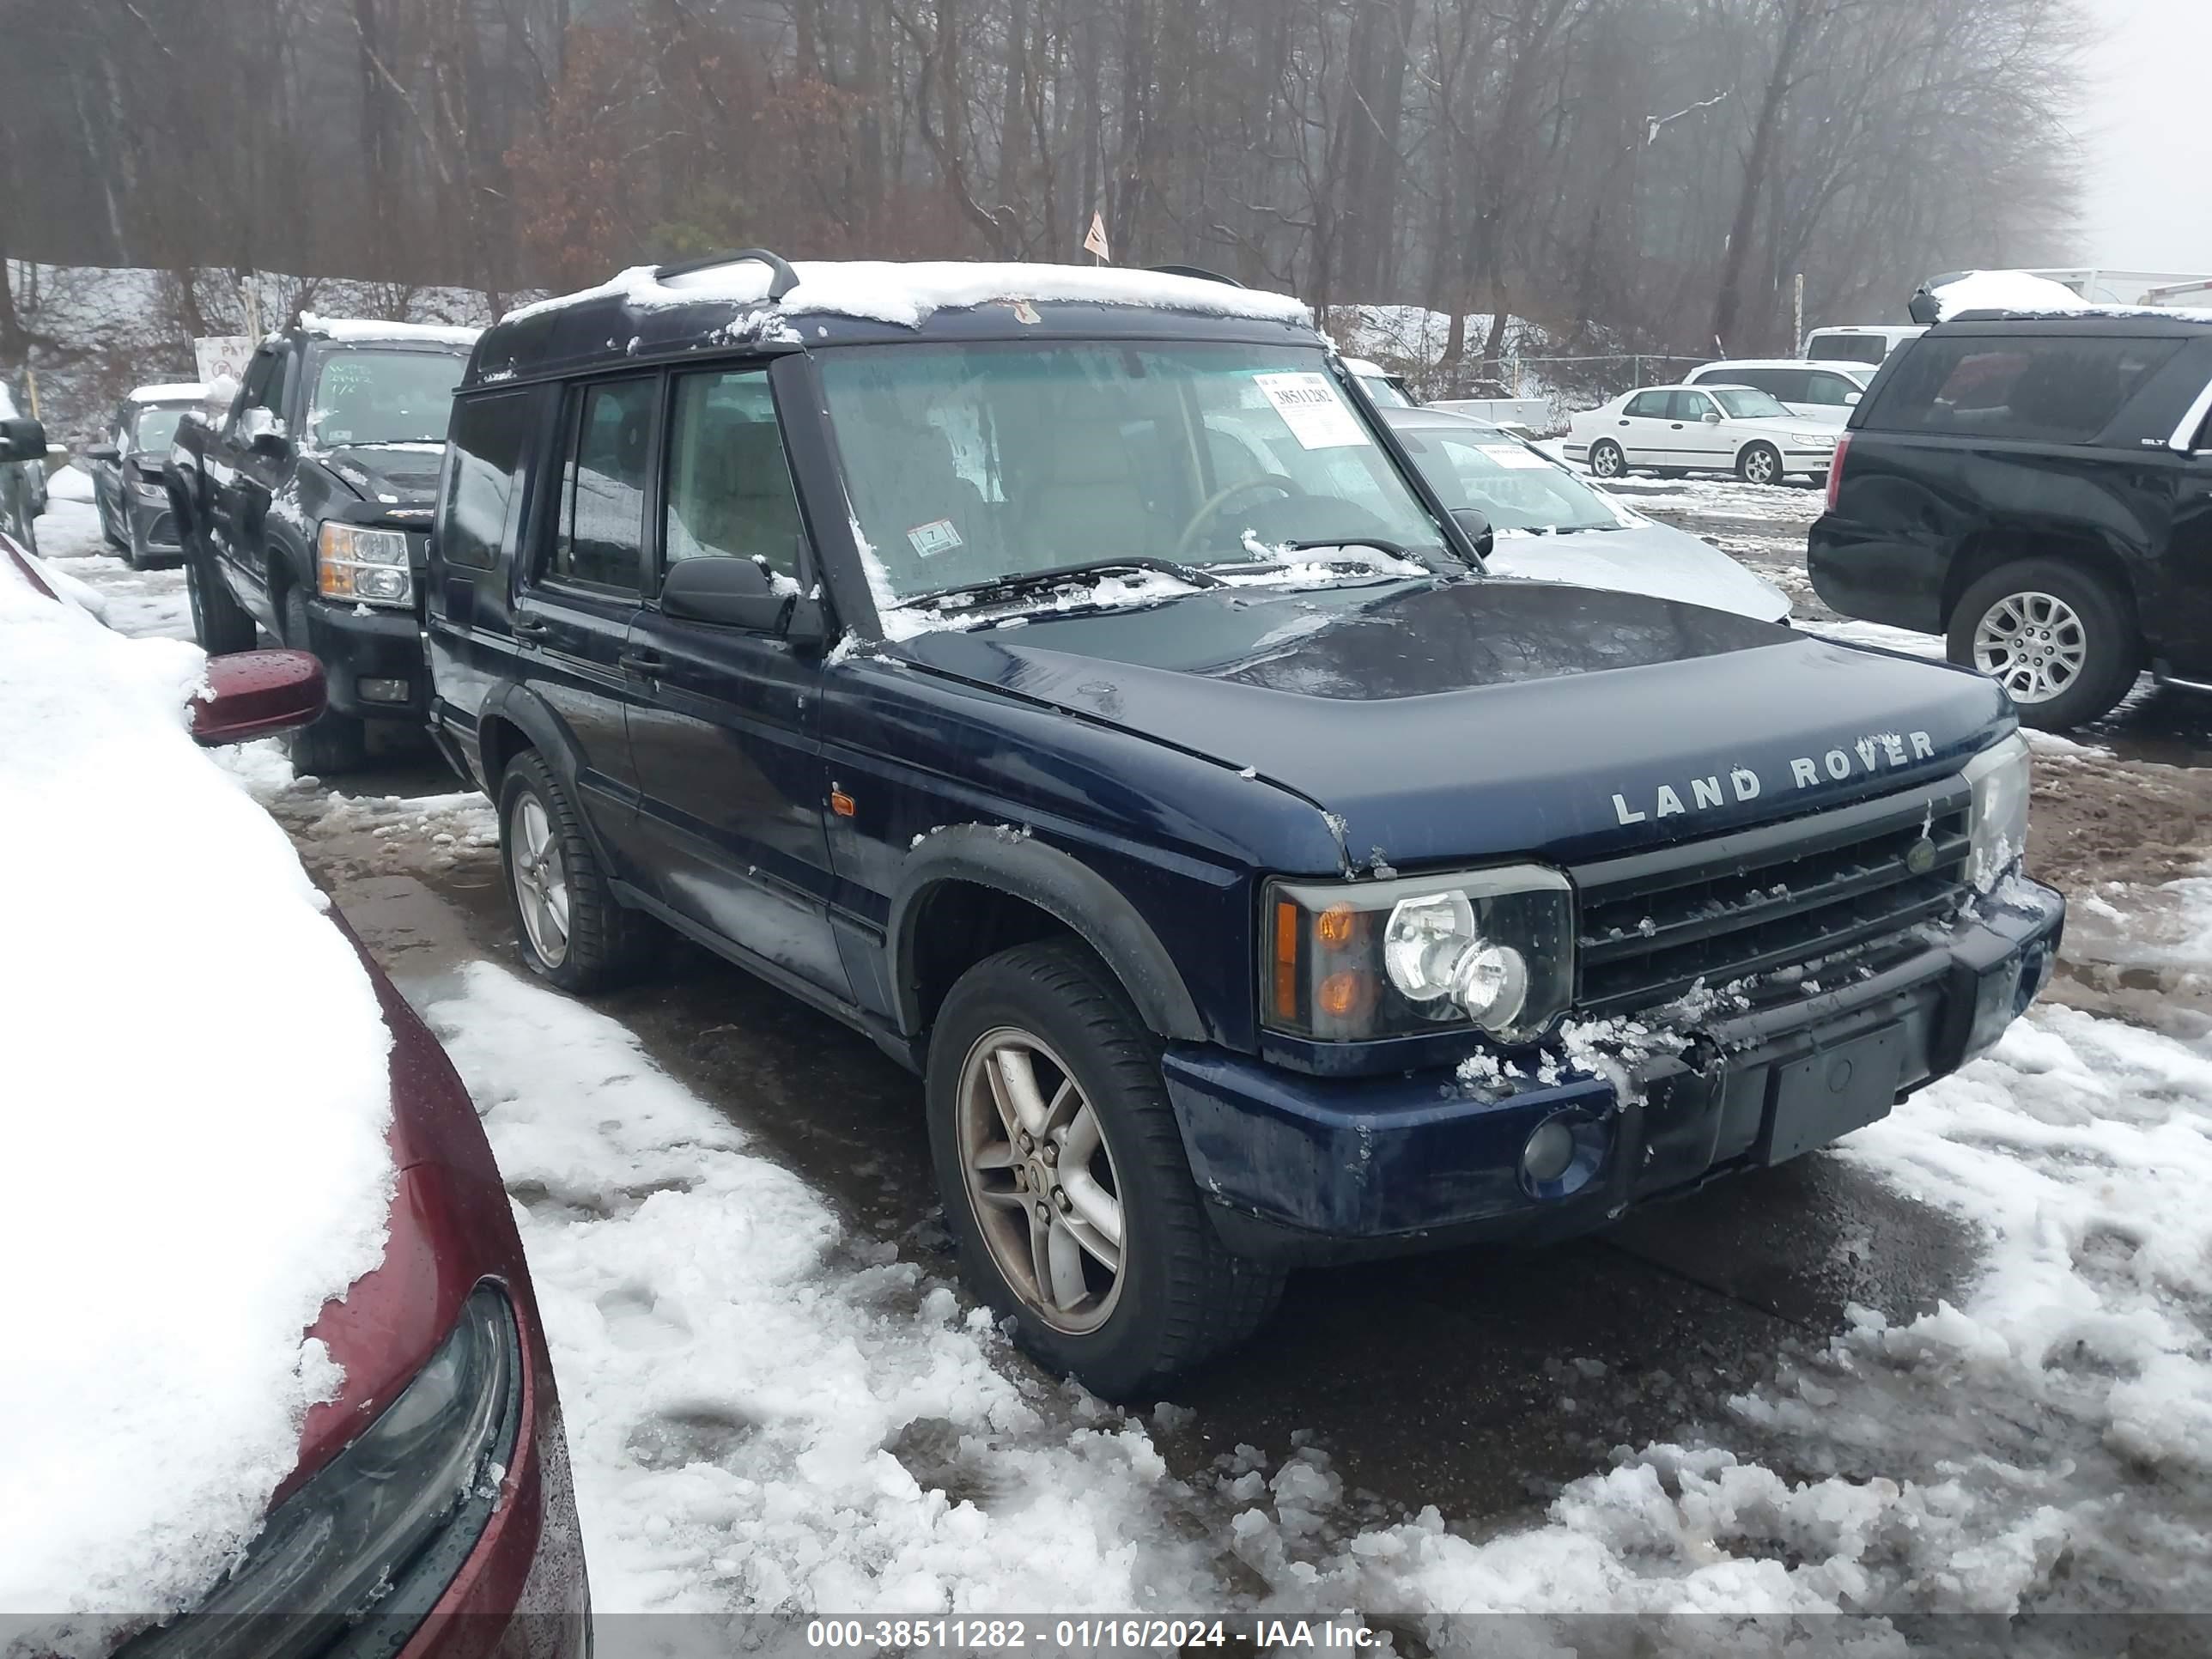 land rover discovery 2003 saltw16423a804495